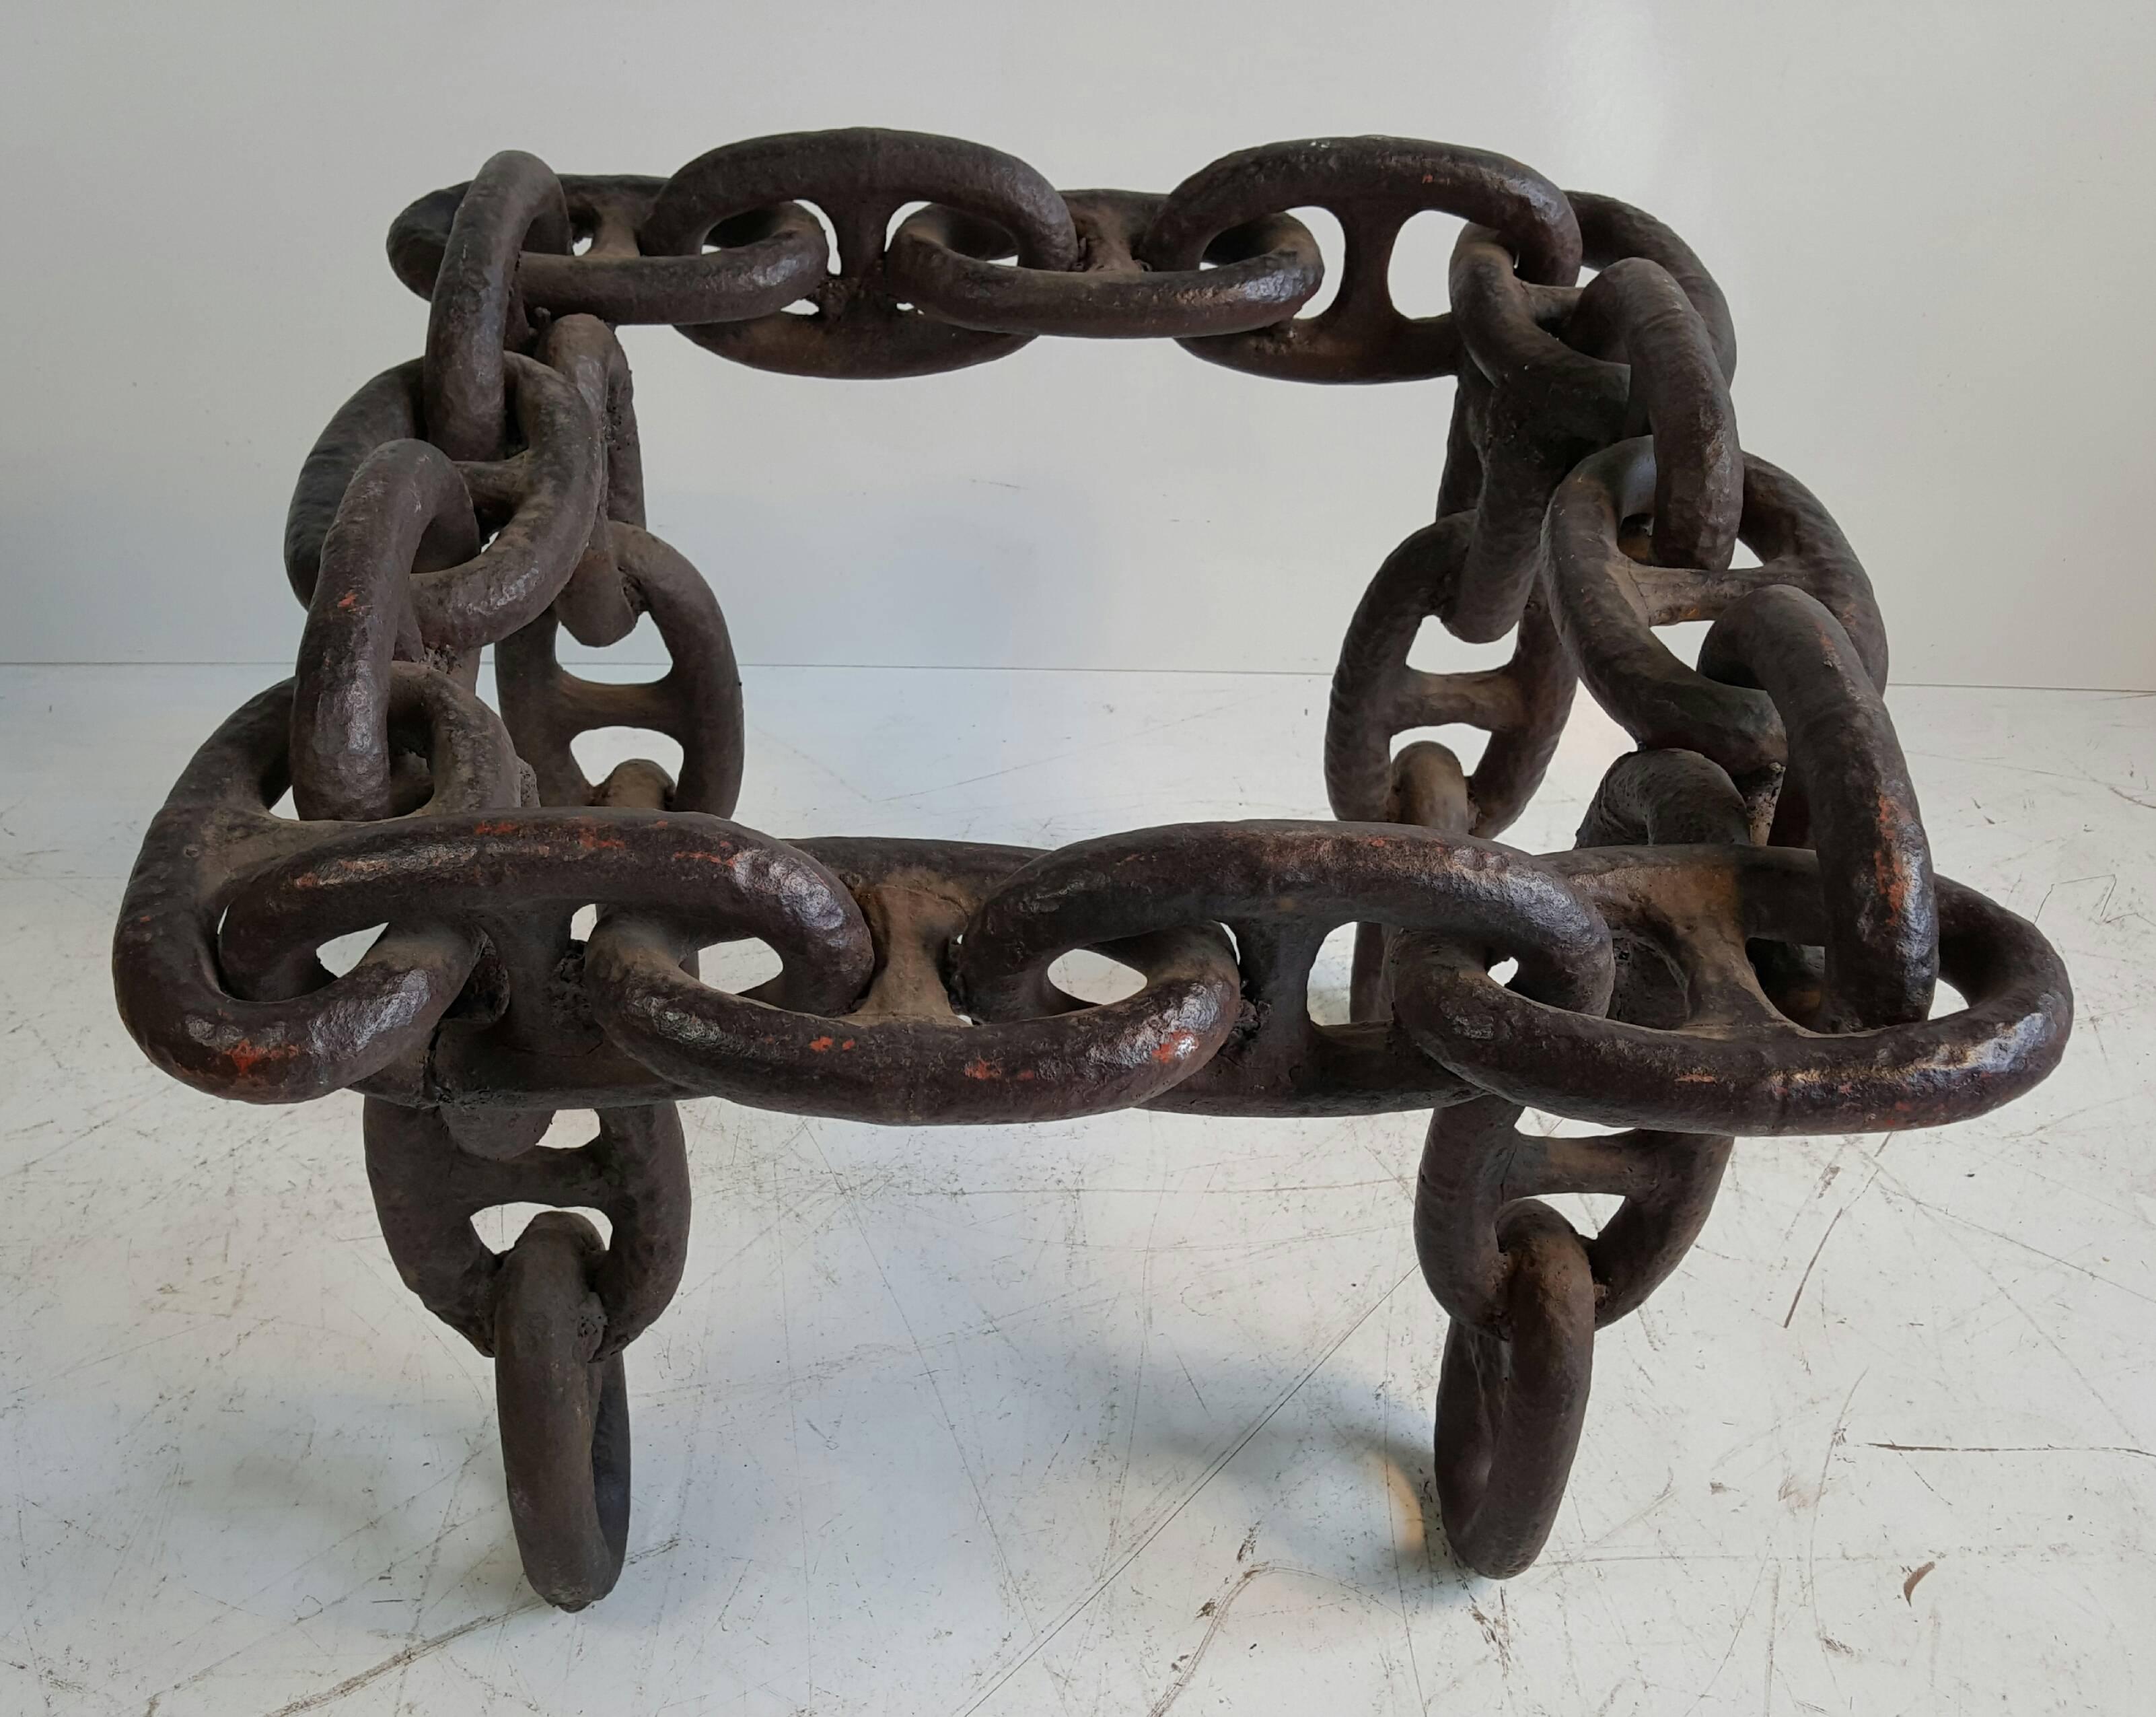 Heavy Mid-Century welded iron ship chain Industrial table. Massive chain welded, joined to make a wonderful table base, Great proportion and scale, Industrial, yet sophisticated and elegant, Can hold glass from 22